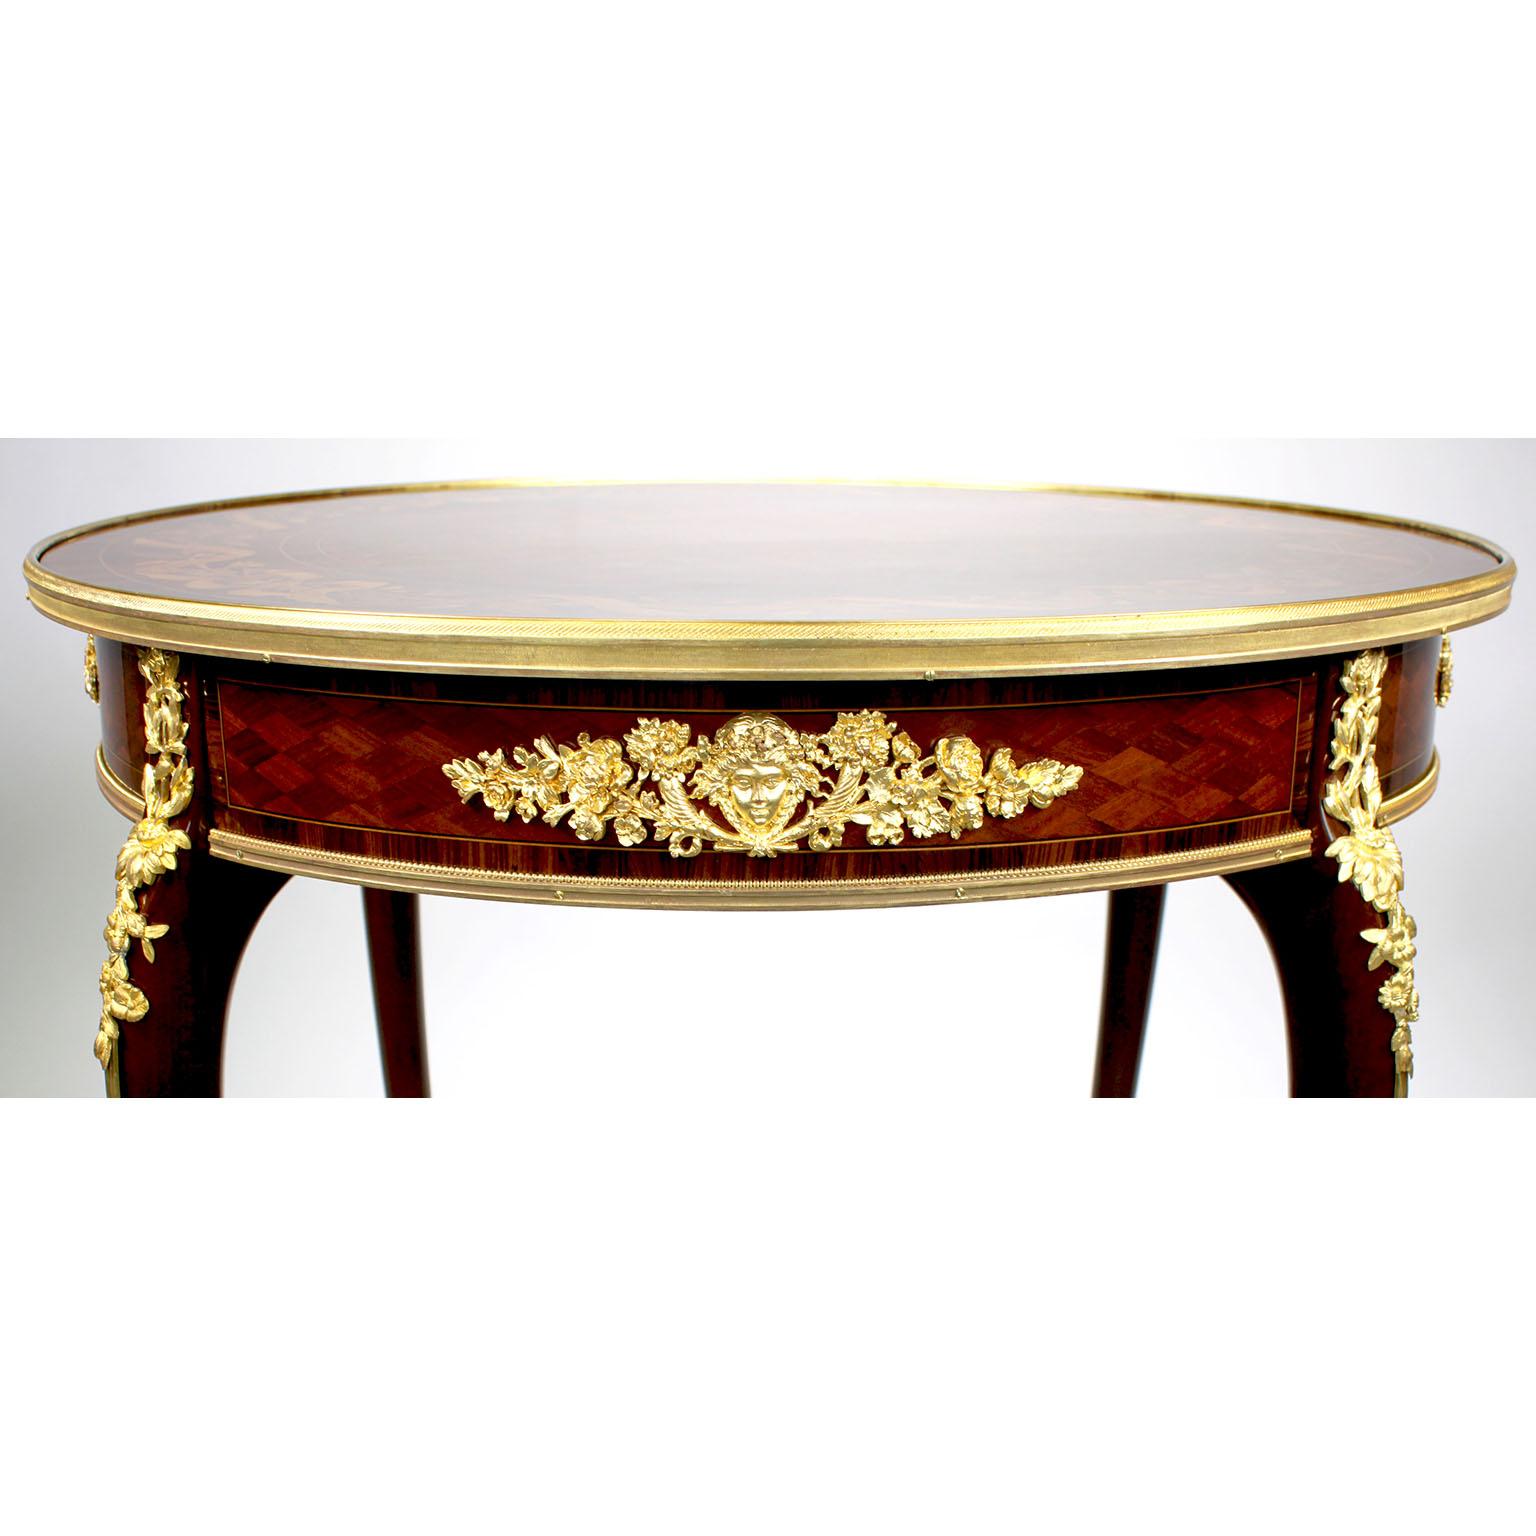 Bronze French 19th-20th Century Circular Marquetry & Ormolu Table, Attr. François Linke For Sale